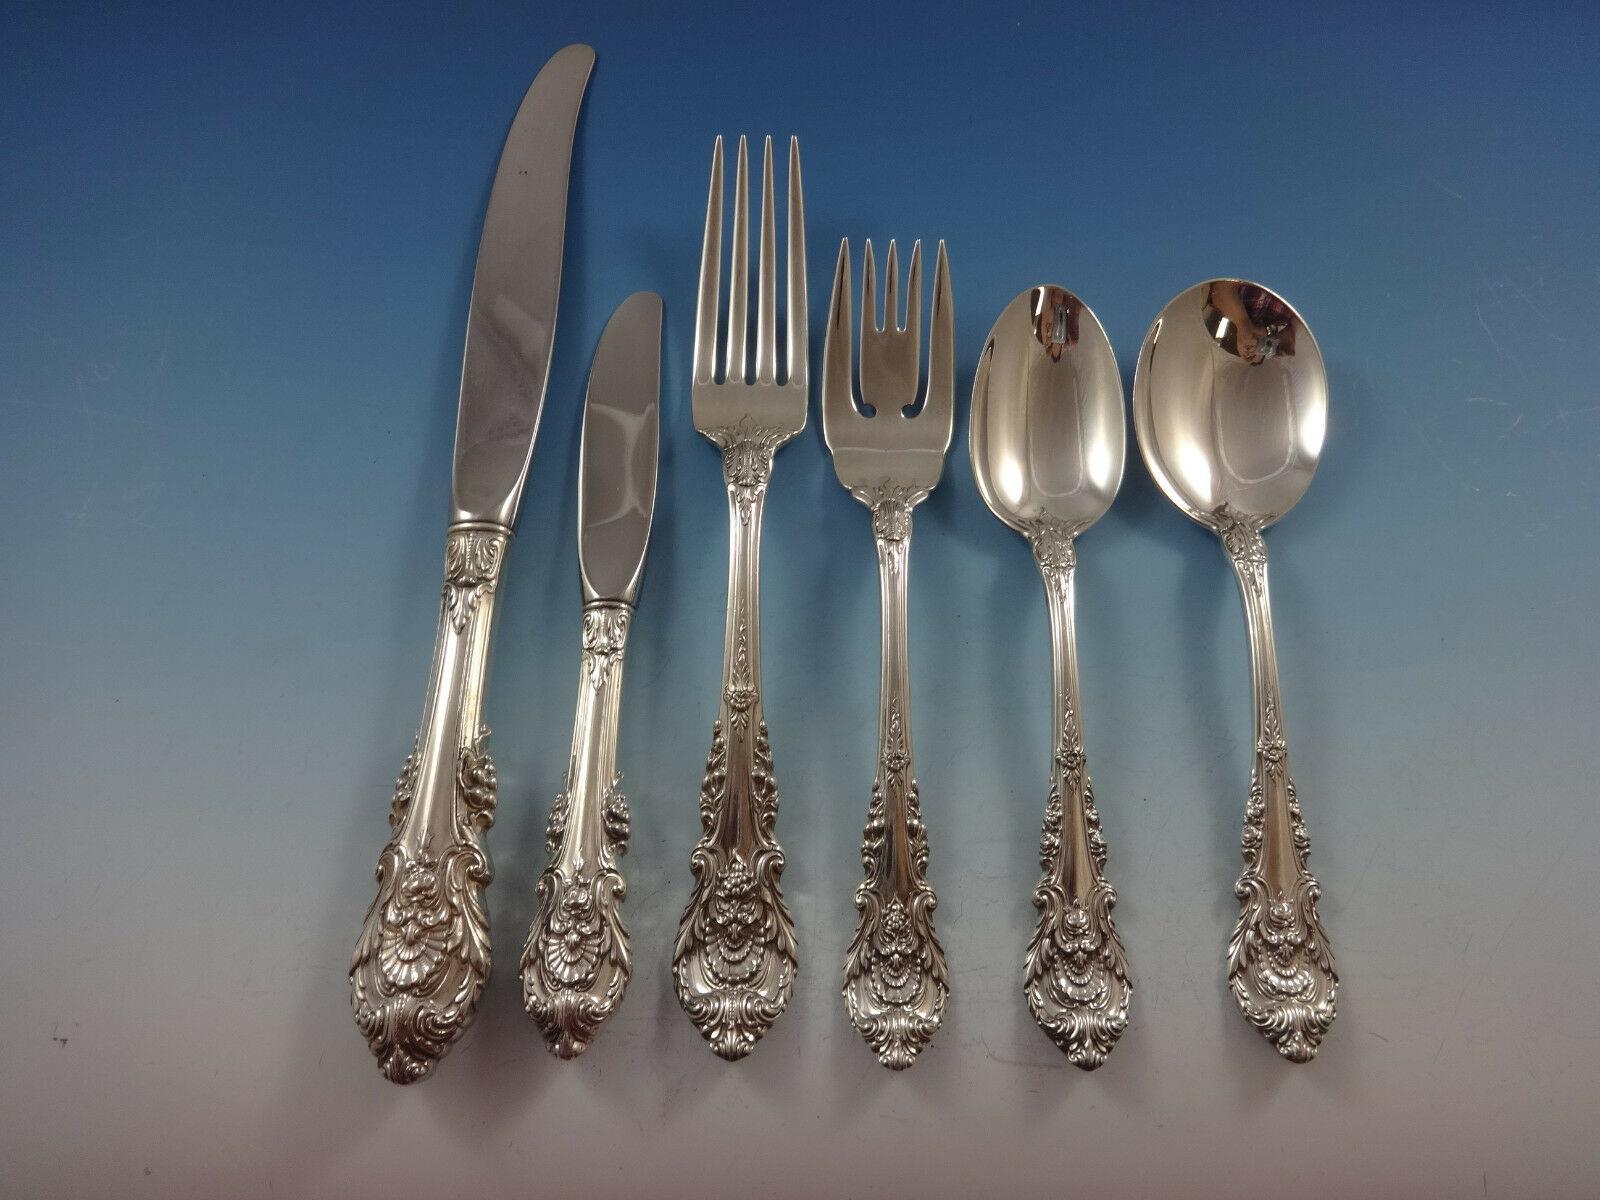 A mood of grandeur is captured in this English Renaissance style pattern interpreted from the designs of architect Sir Christopher Wren. Earth's bounties are depicted through grape clusters on the knife, fruits on the fork and a rose on the